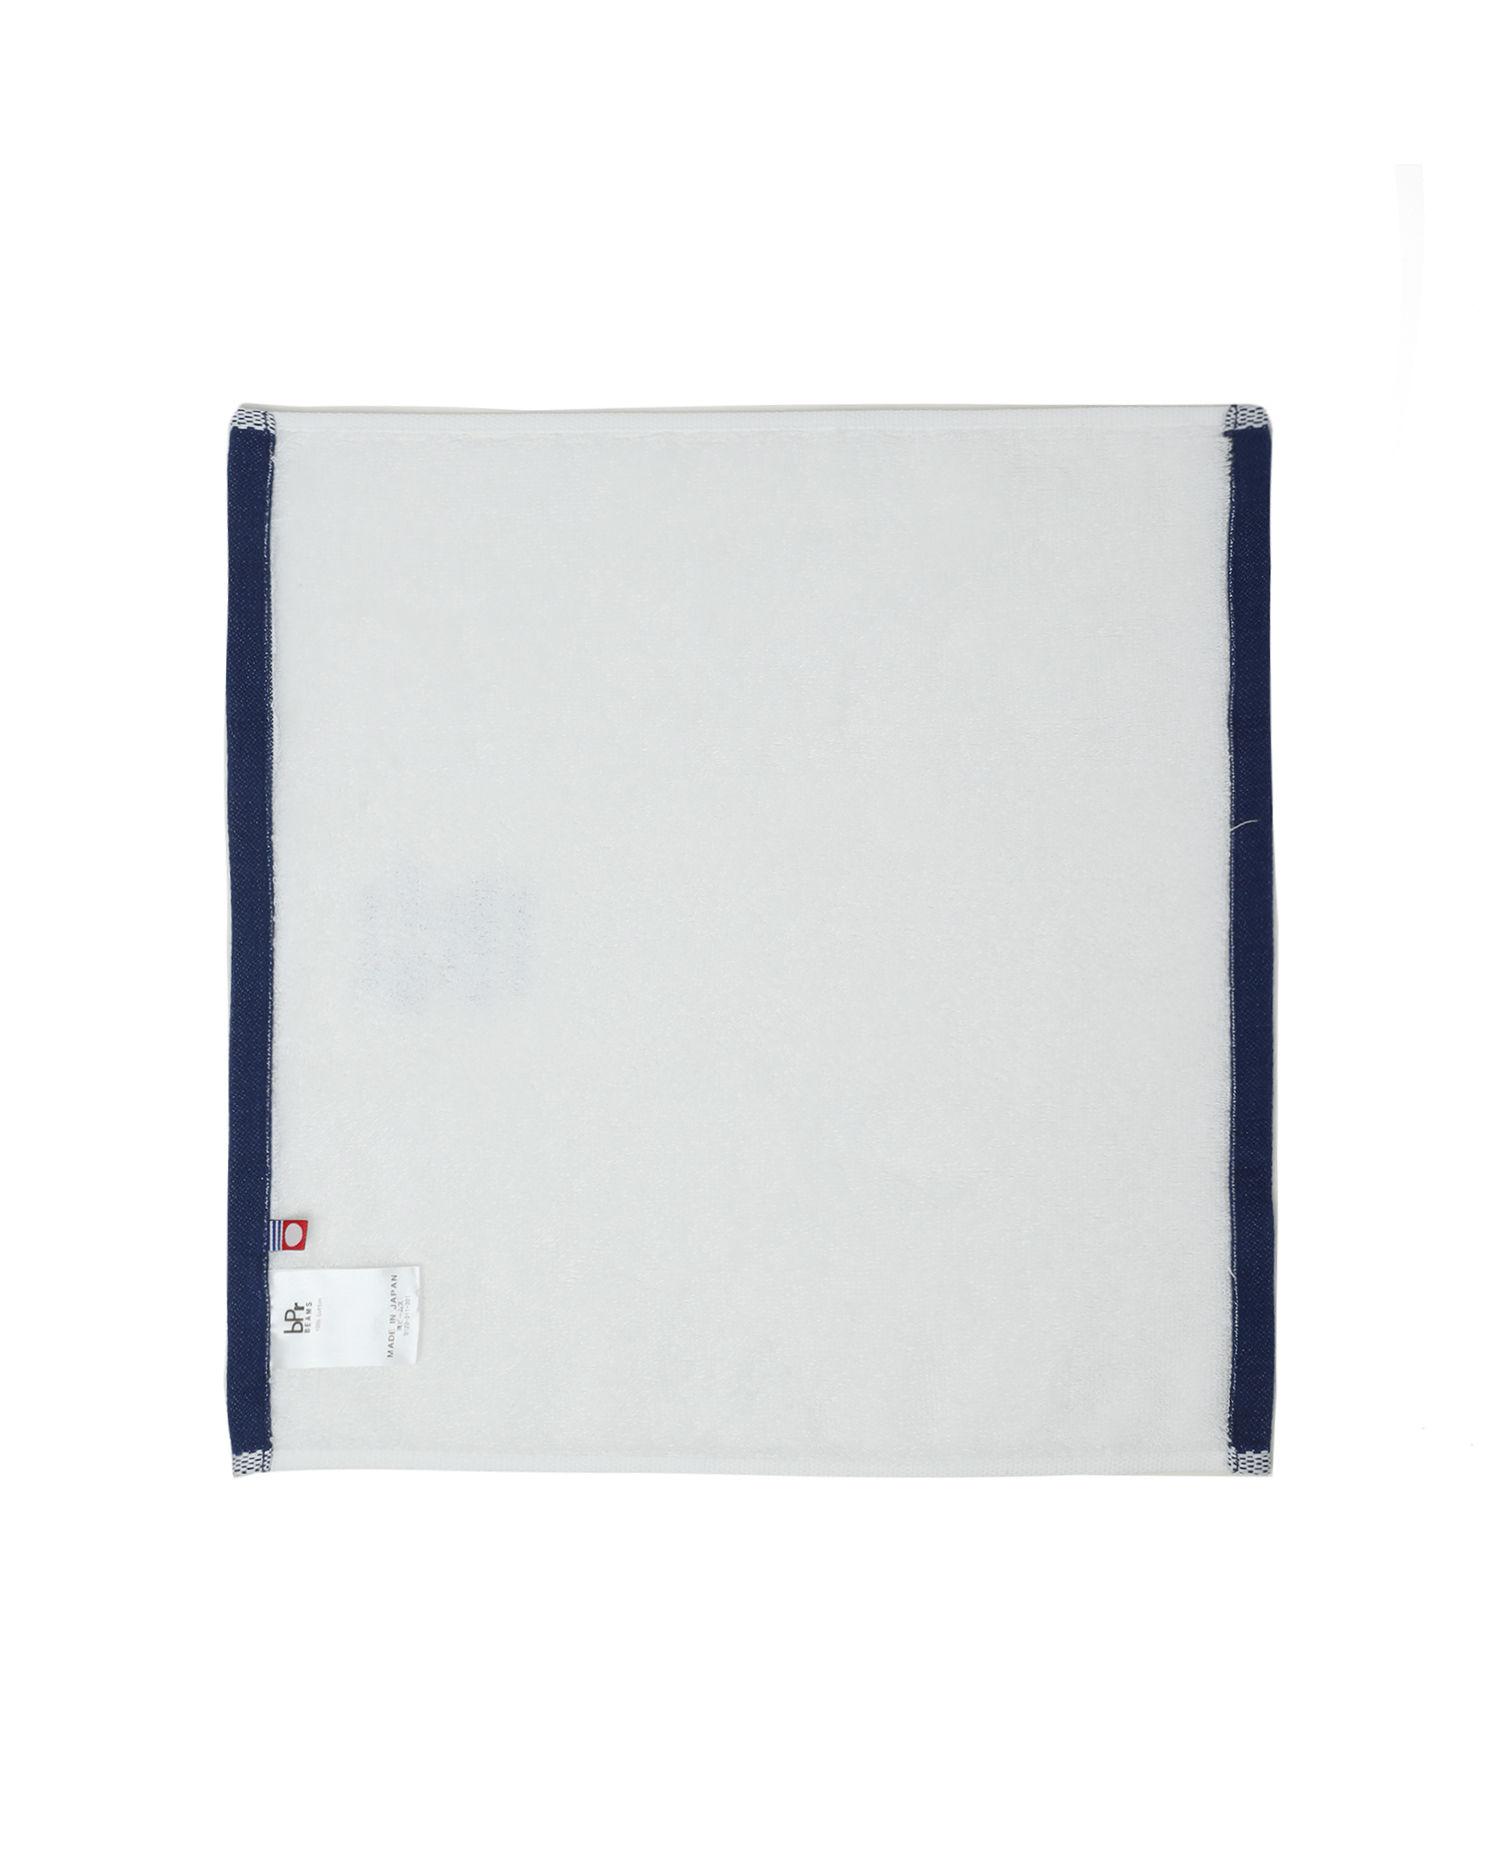 Cotton towel by BPR